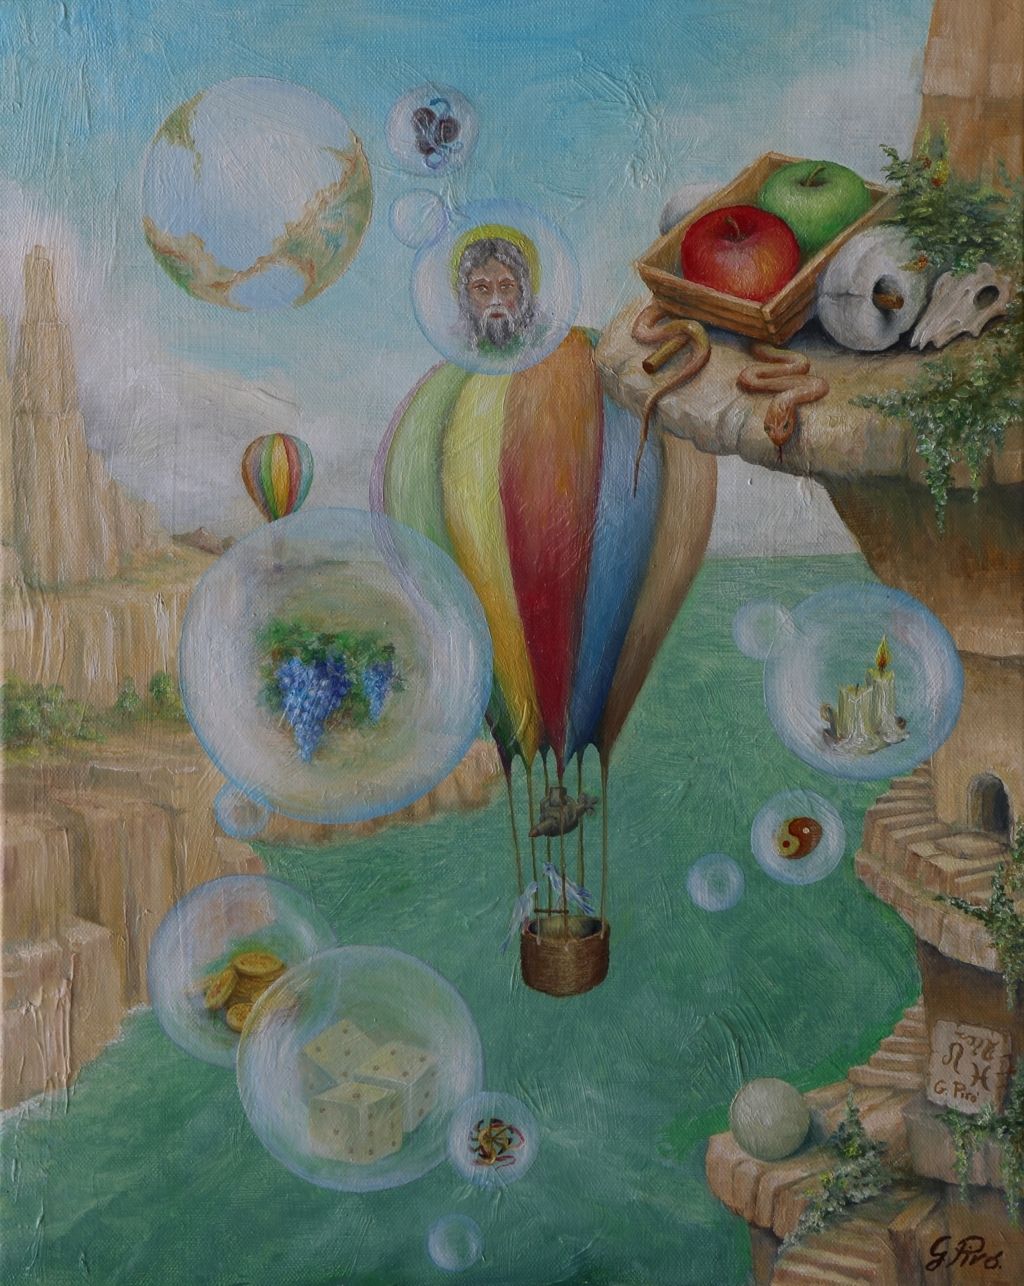 gregory pyra piro painting, gregory pyra piro oil on canvas, paintings for your home, paintings for your office